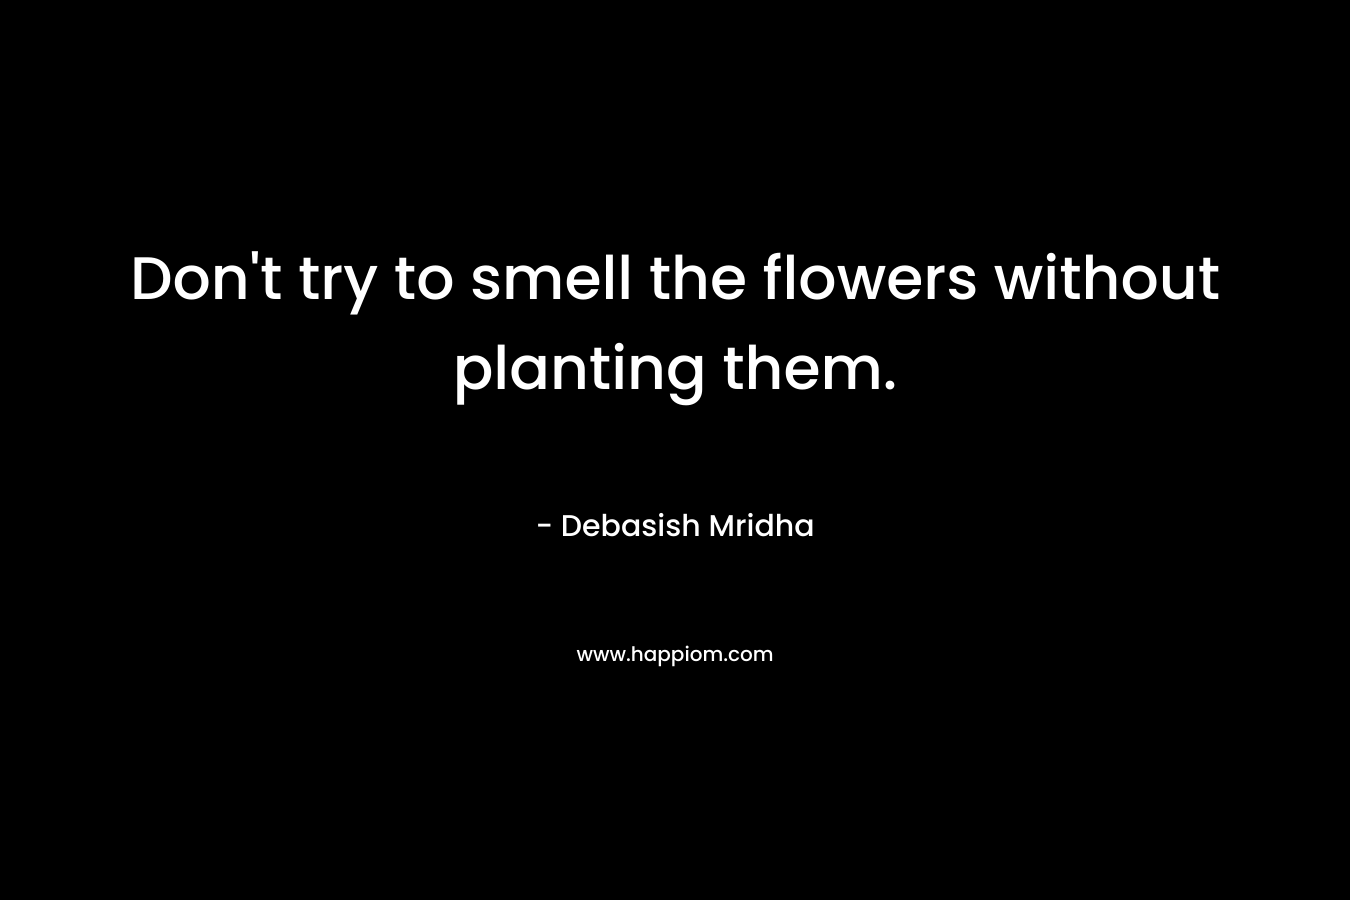 Don’t try to smell the flowers without planting them. – Debasish Mridha